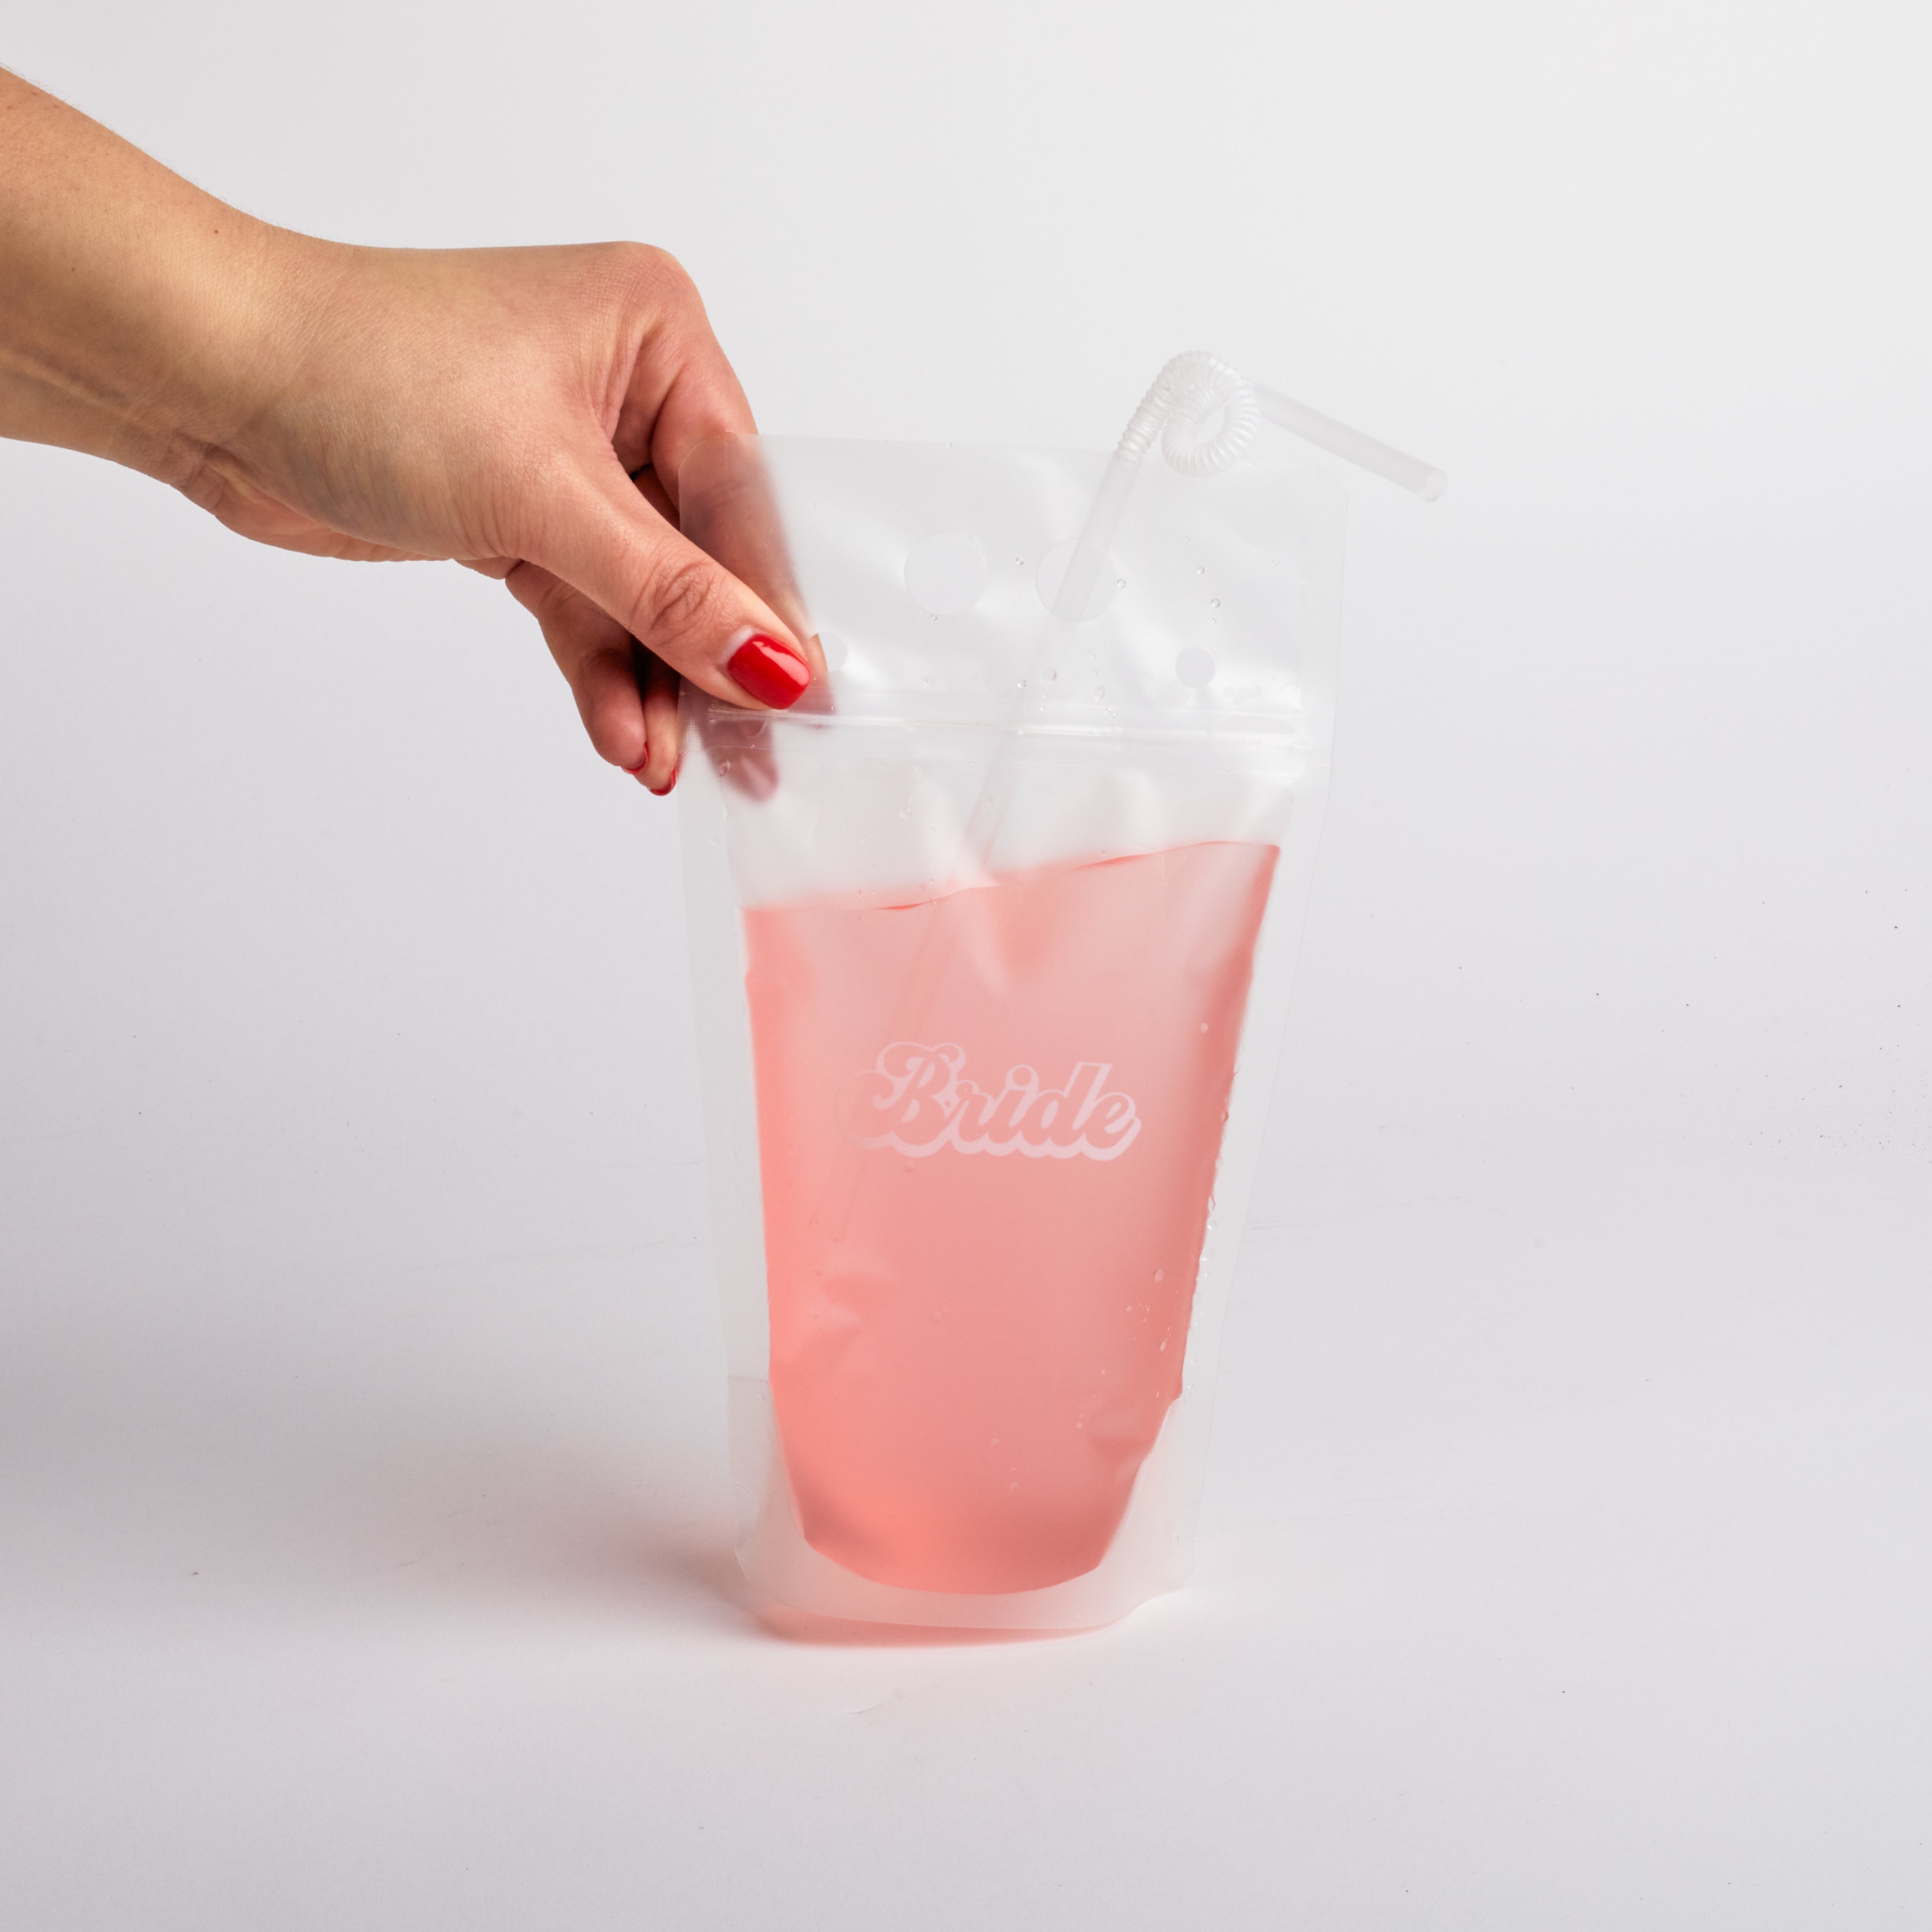 Hand holding "bride" drink pouch.